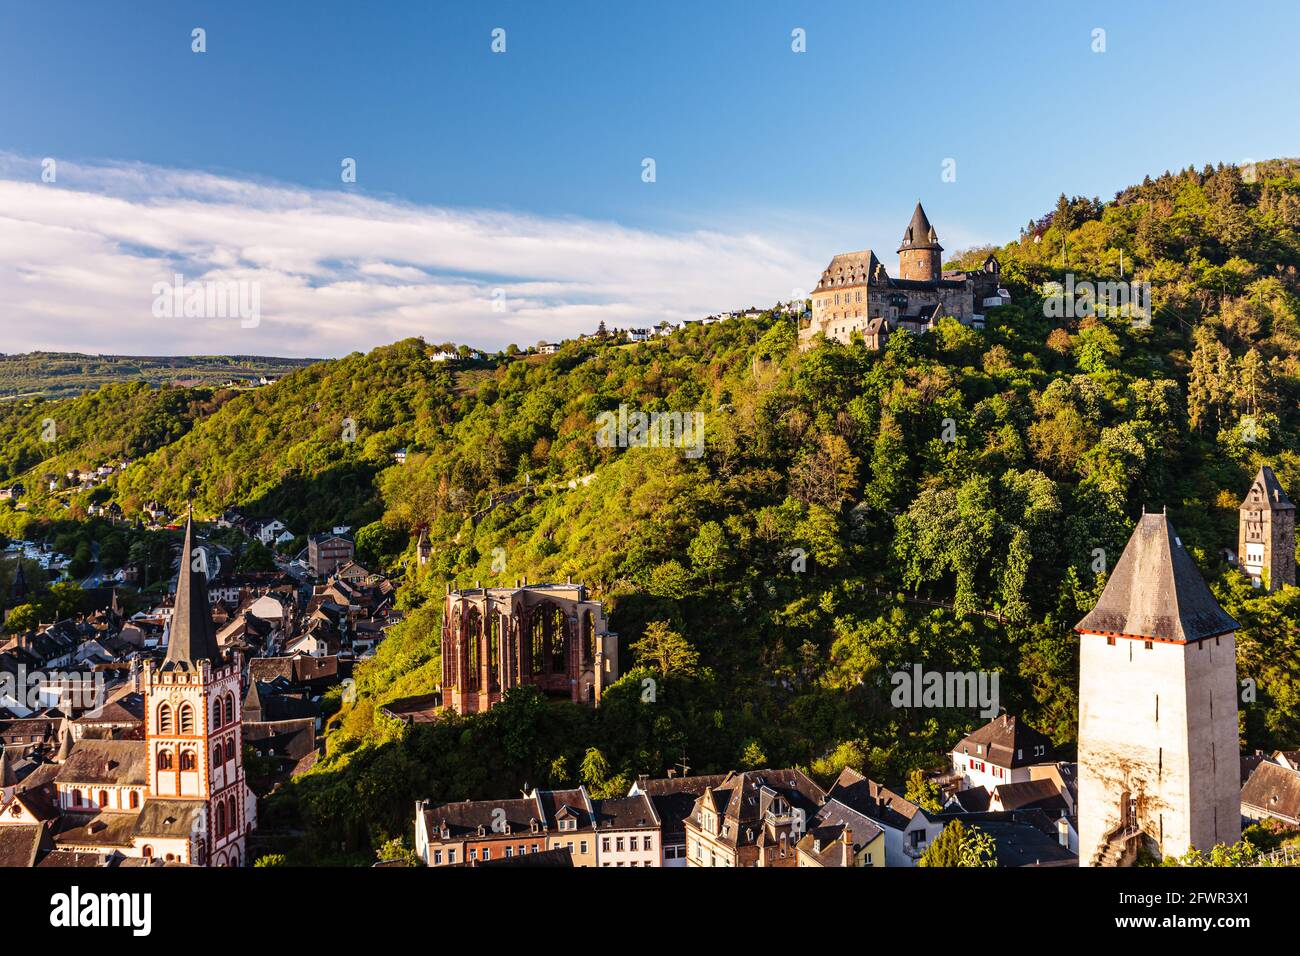 Stahleck castle, Werner chapel ruin and St. Peter church at dawn, Bacharach, rhine valley, Germany, Europe Stock Photo